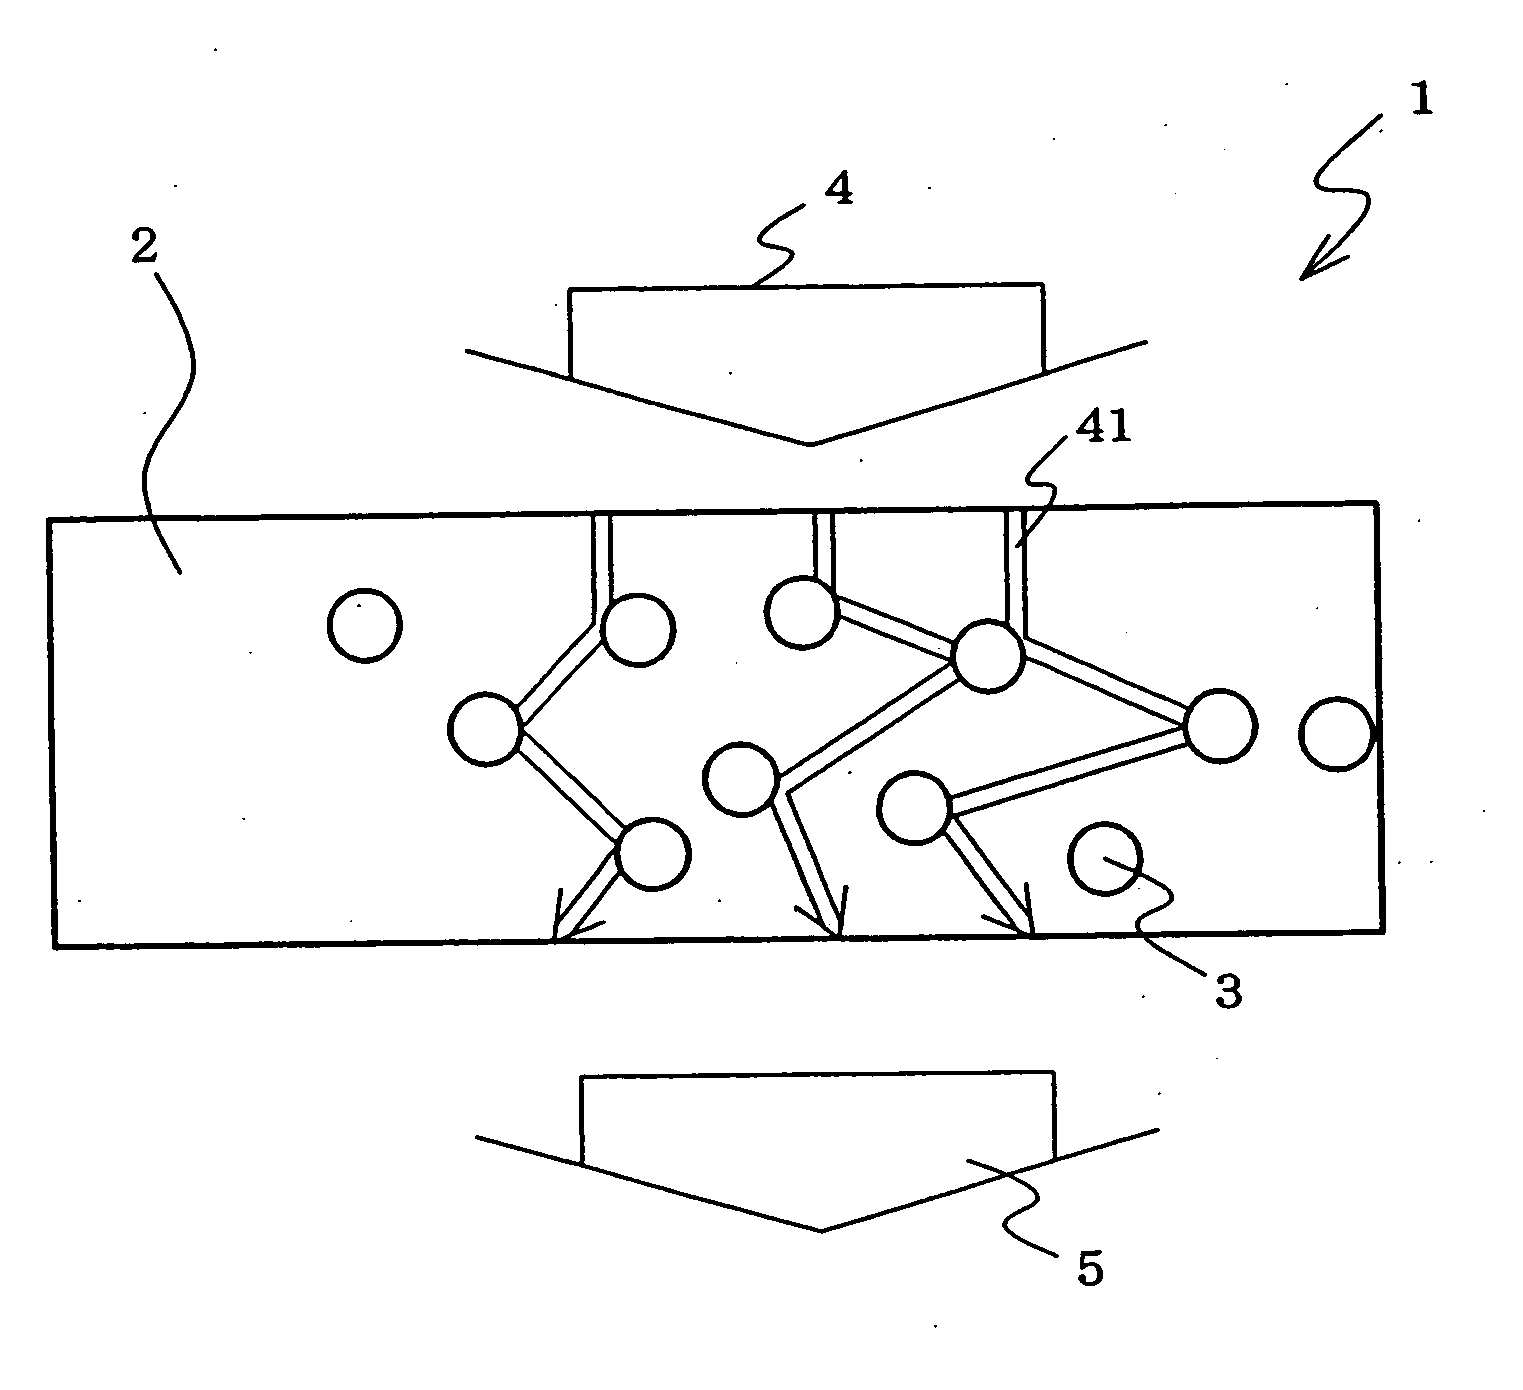 Color conversion layer and light-emitting device